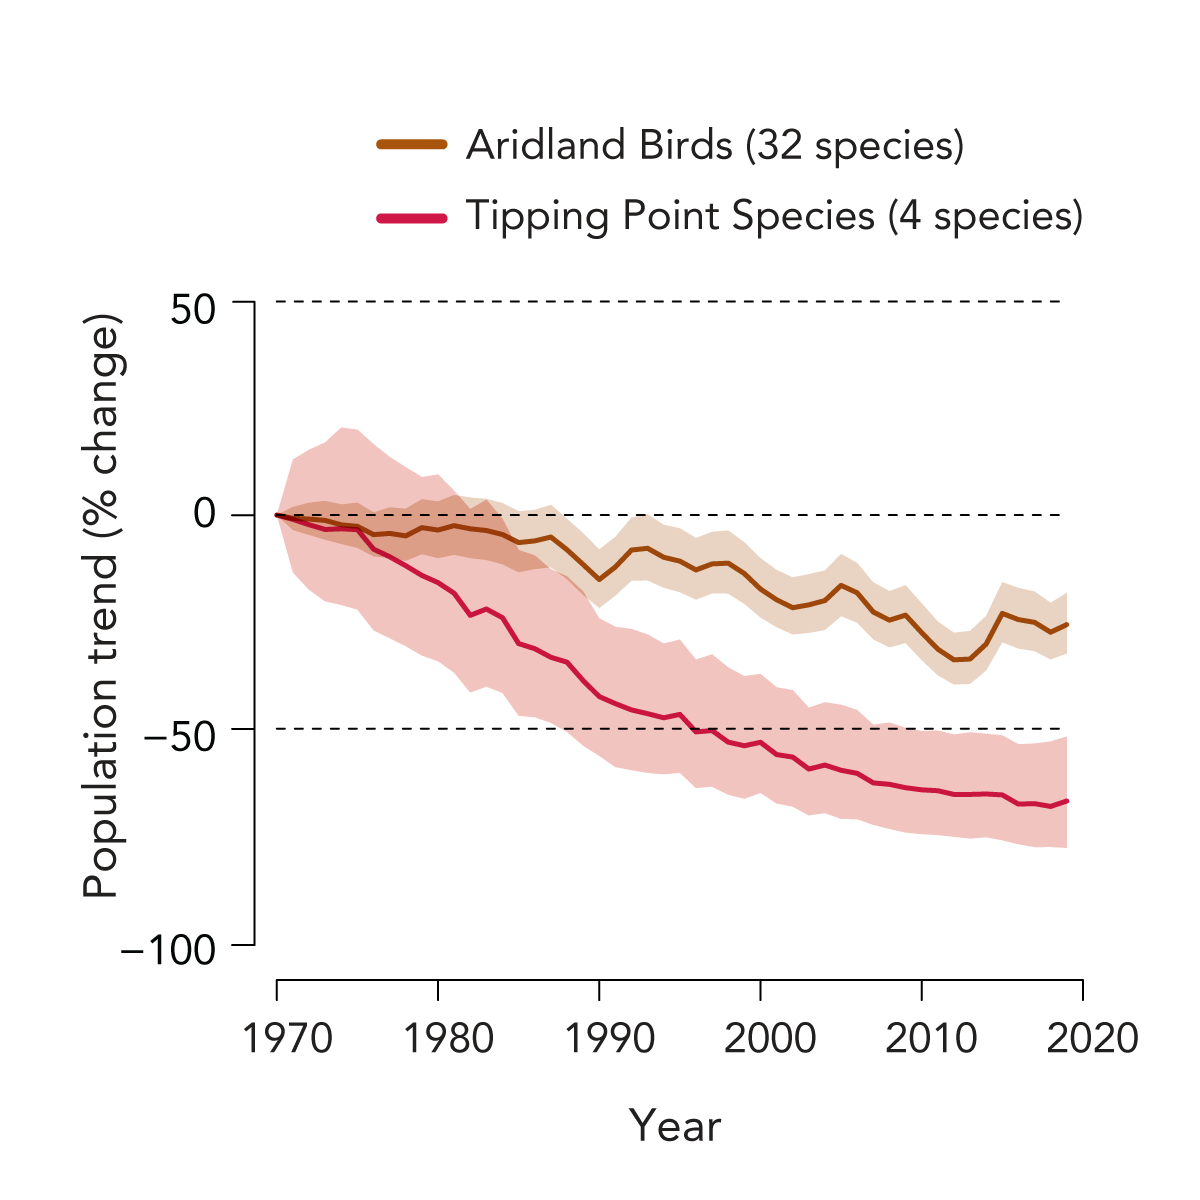 a graph showing declines in 32 species of Aridland Birds, brown line, and 4 tipping point species, red line, since 1970